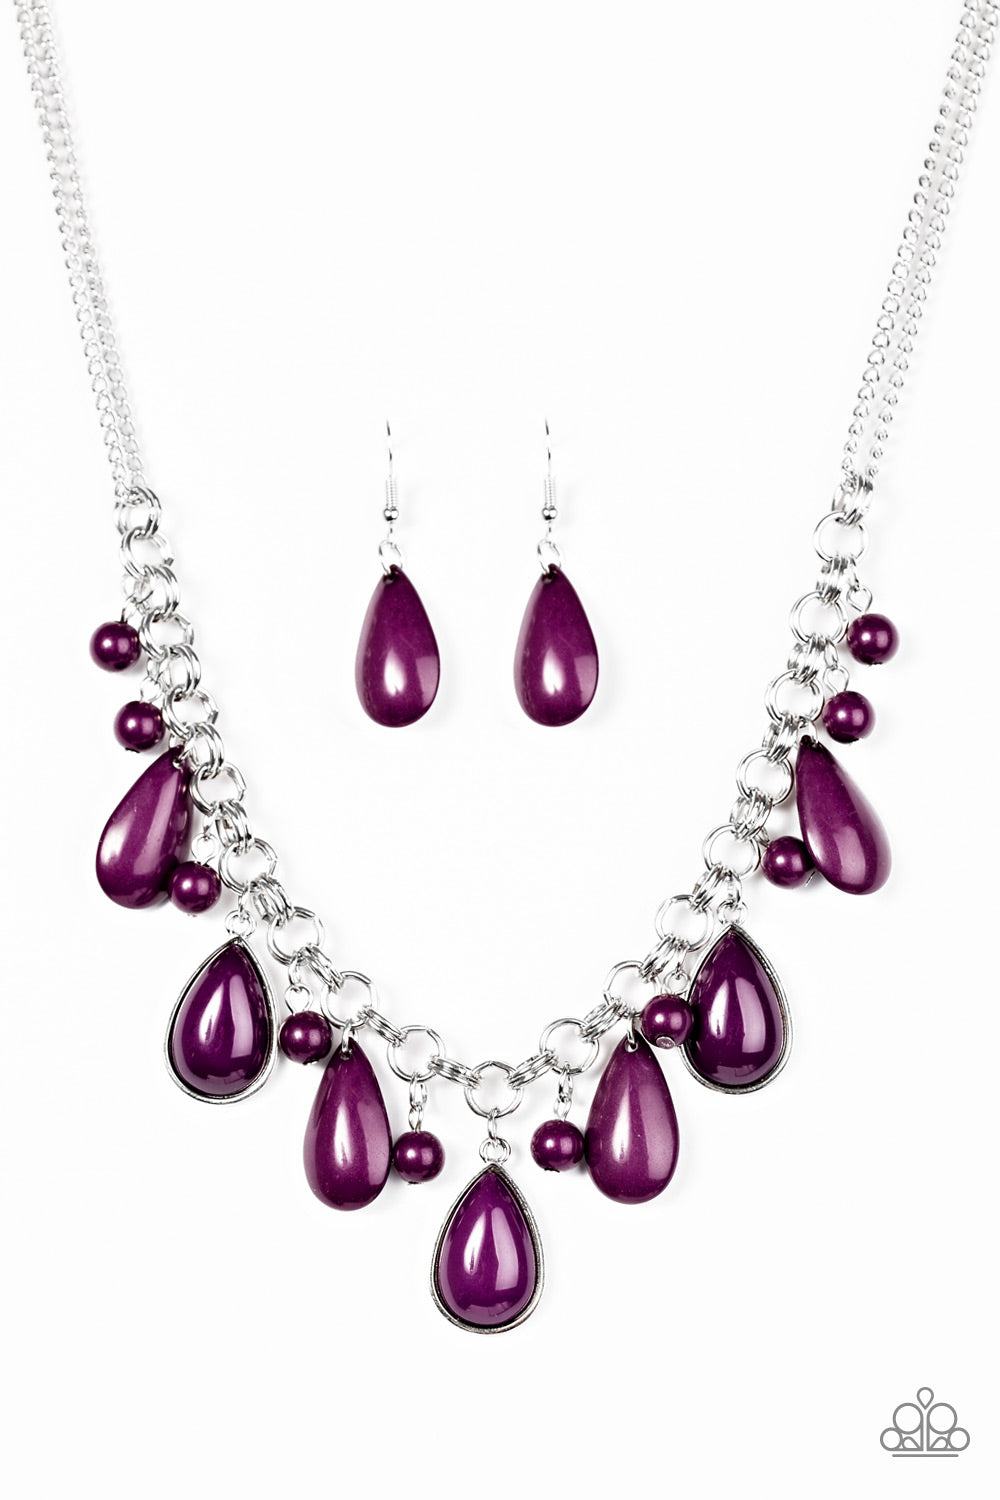 This Side Of Malibu Purple Necklace